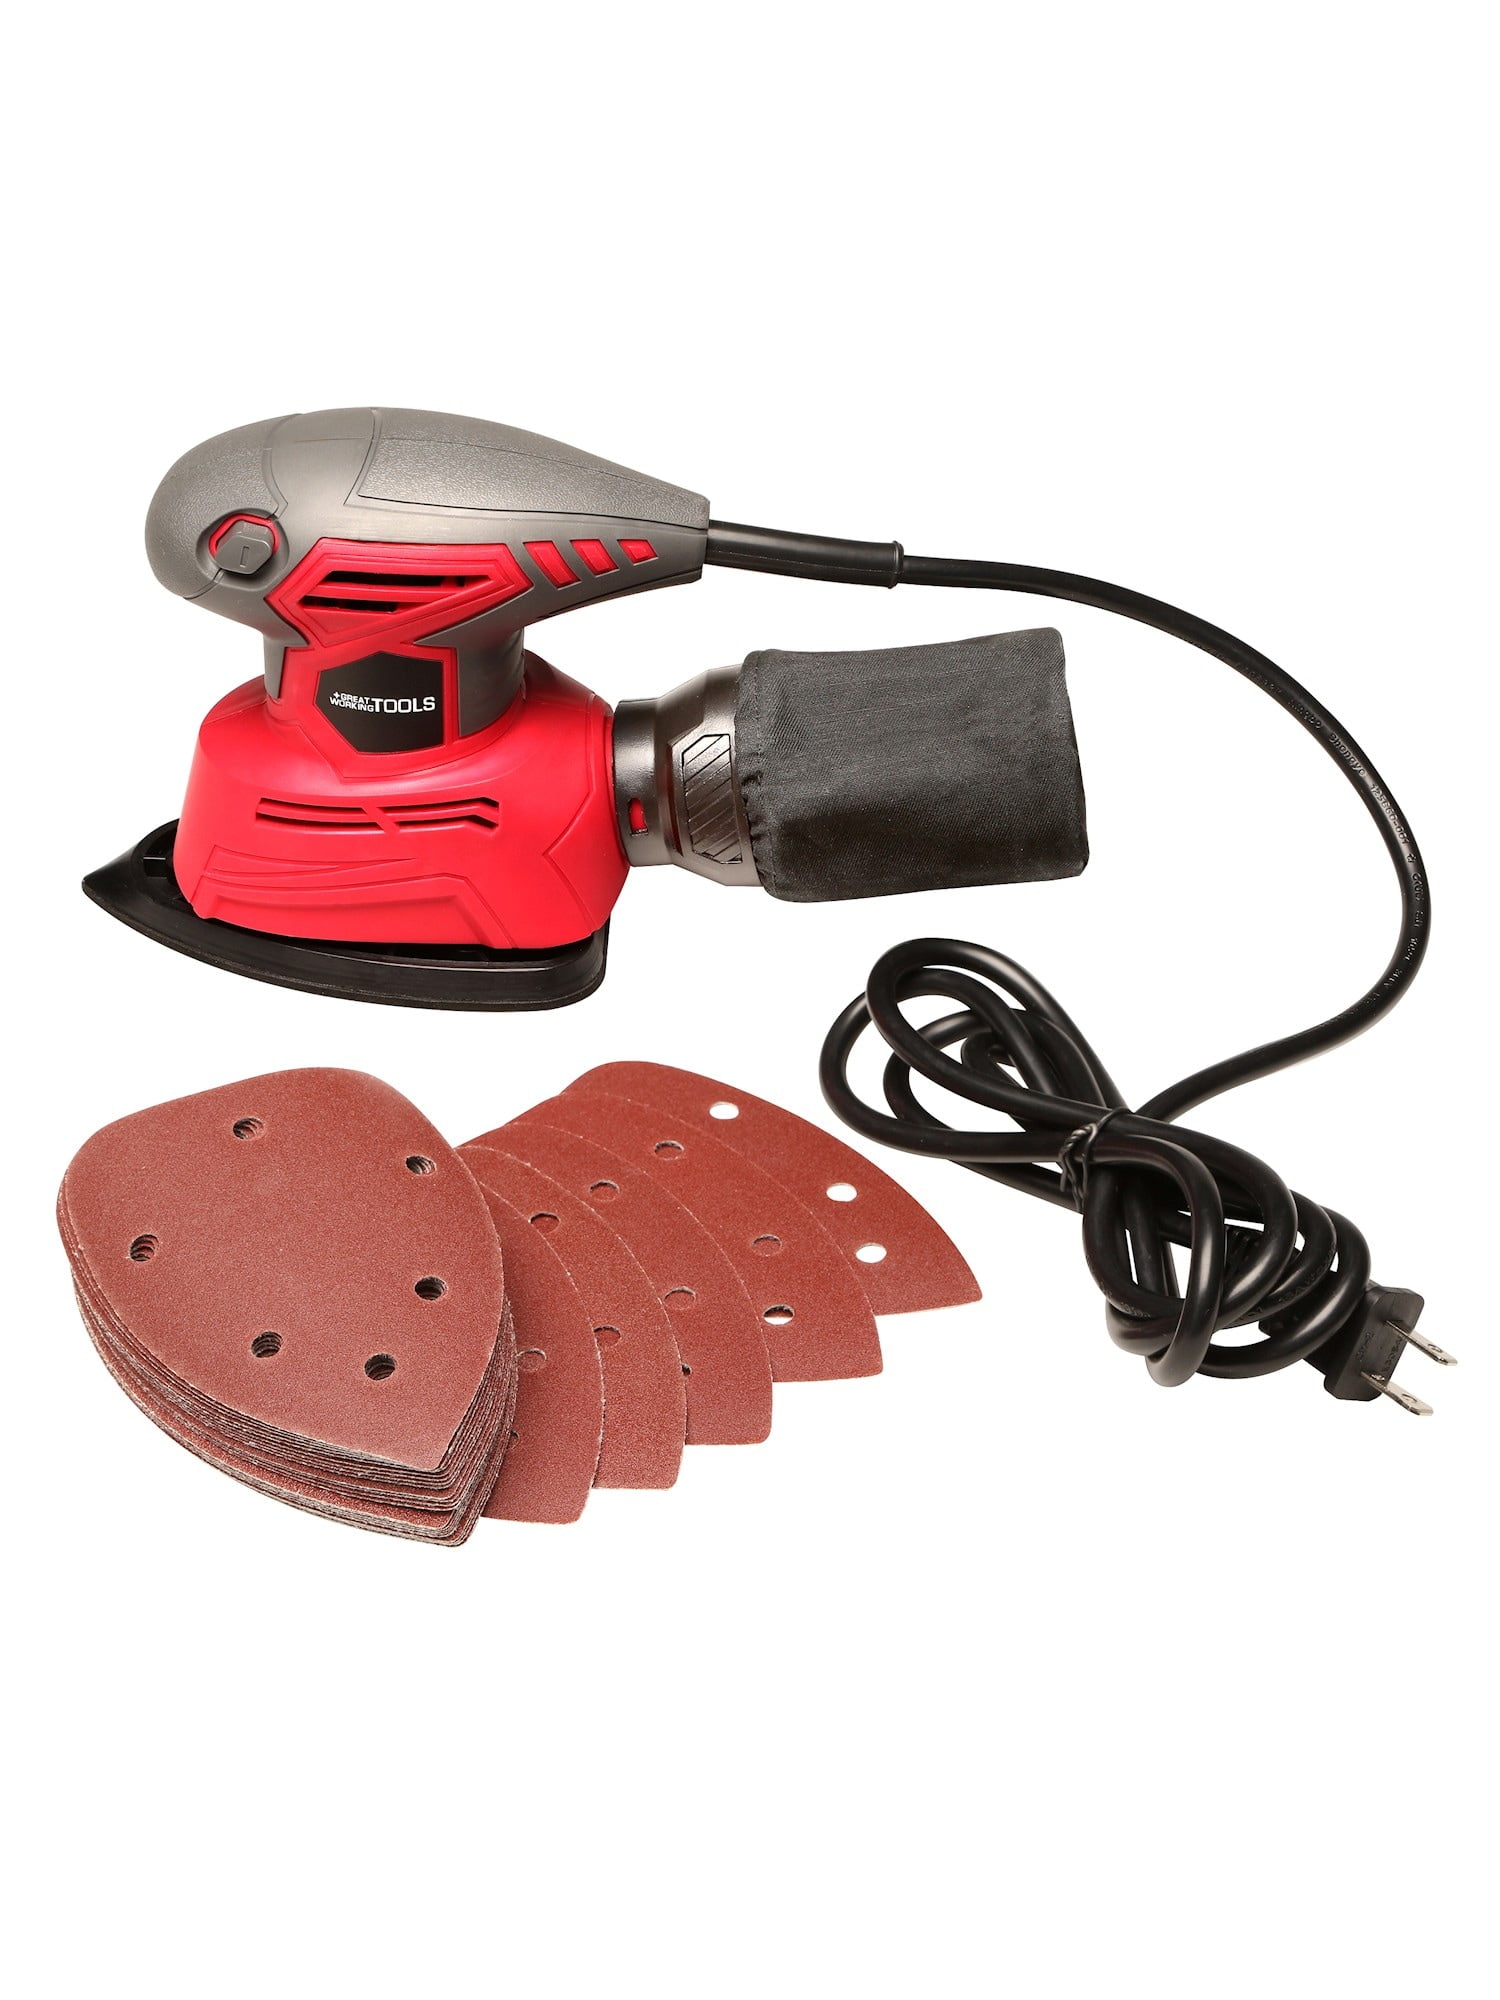 WEN 6301 Electric Detailing Palm Sander FREE & TWO DAY FREE SHIPPING 